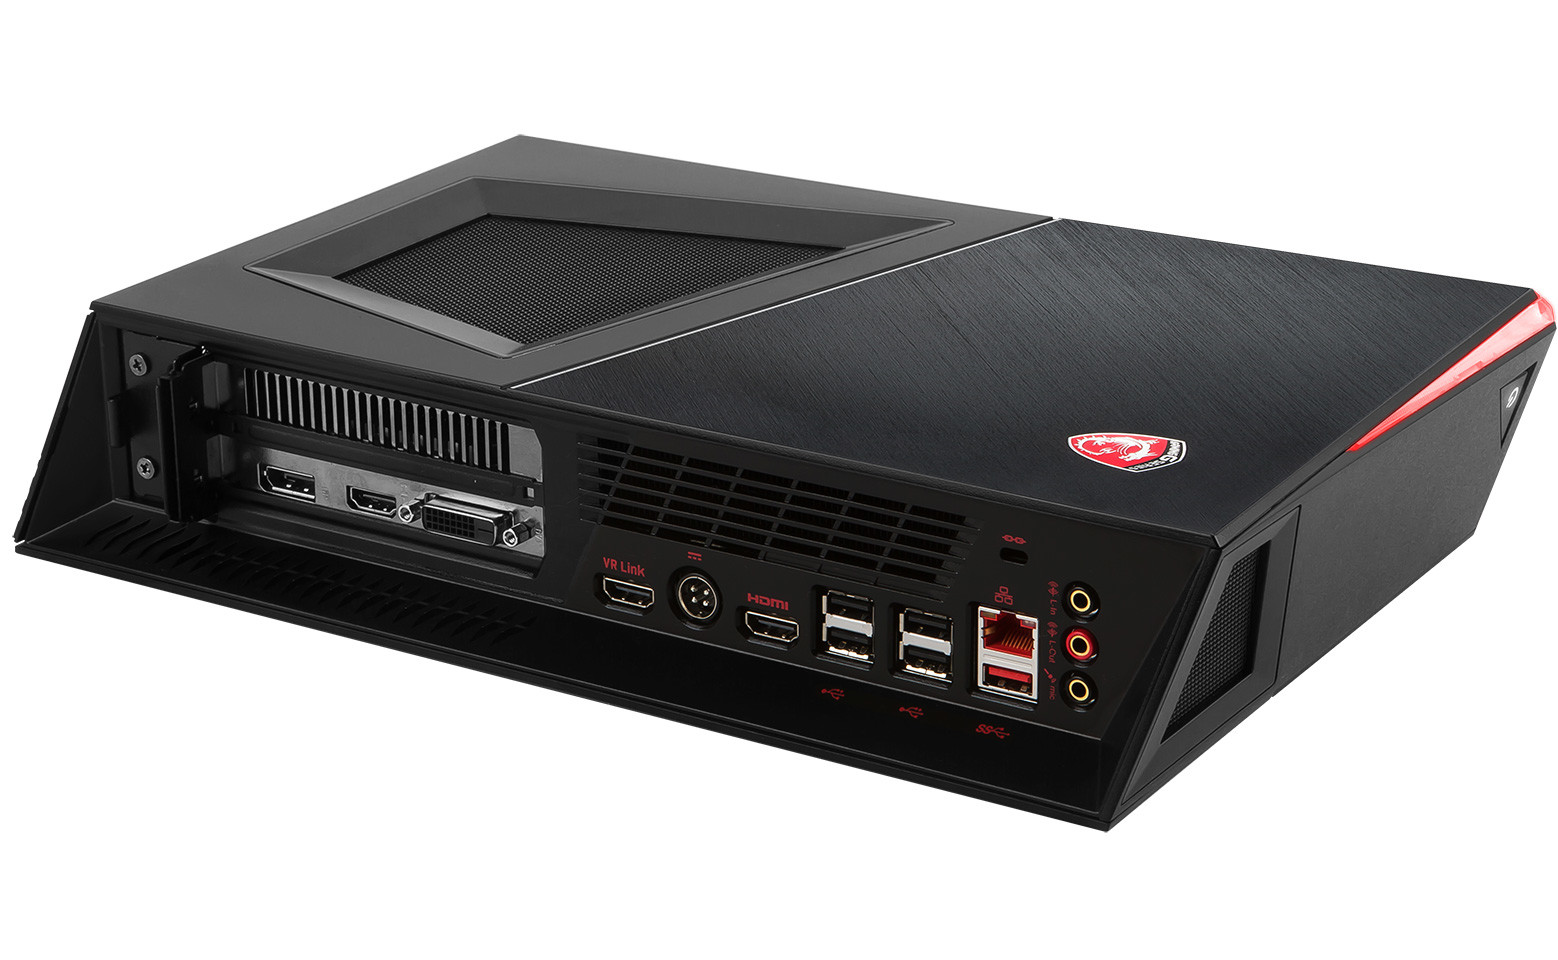 MSI launches Trident, a console sized gaming PC - NotebookCheck.net News